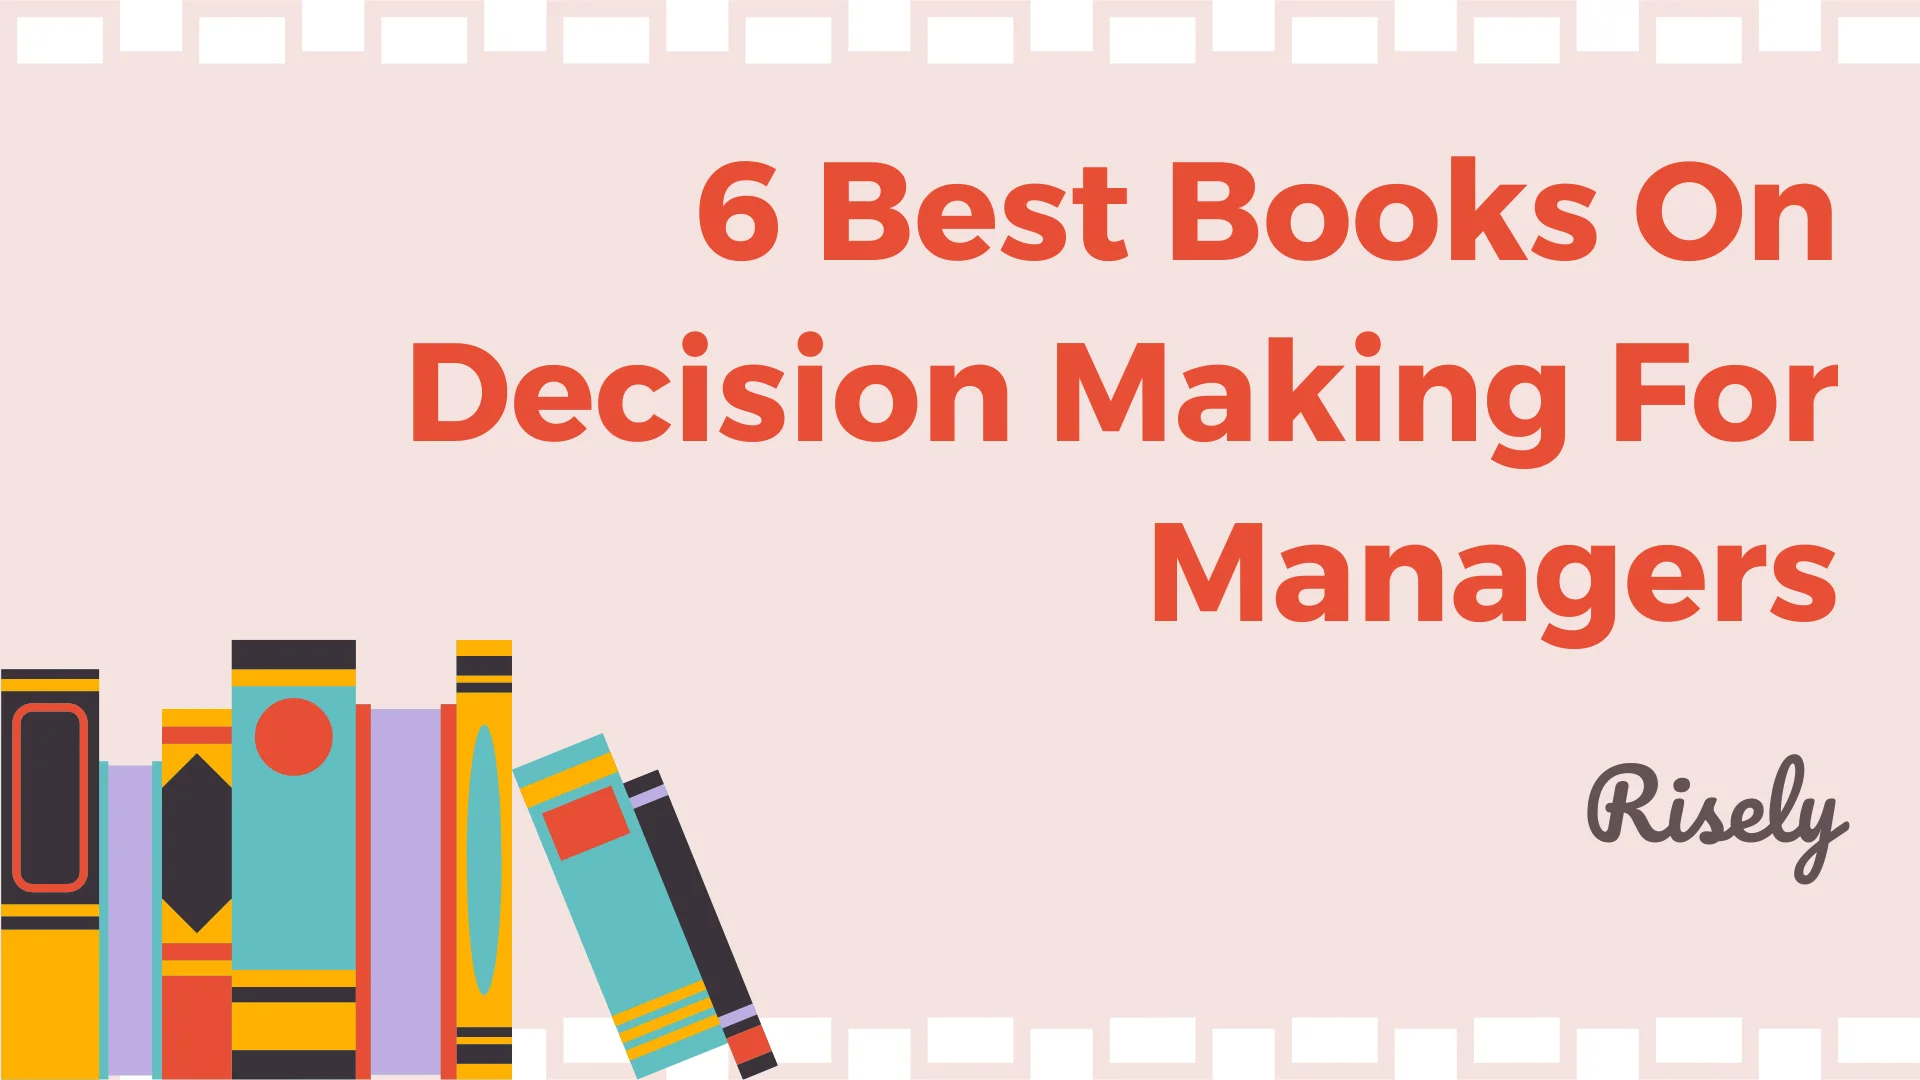 decision making books for managers